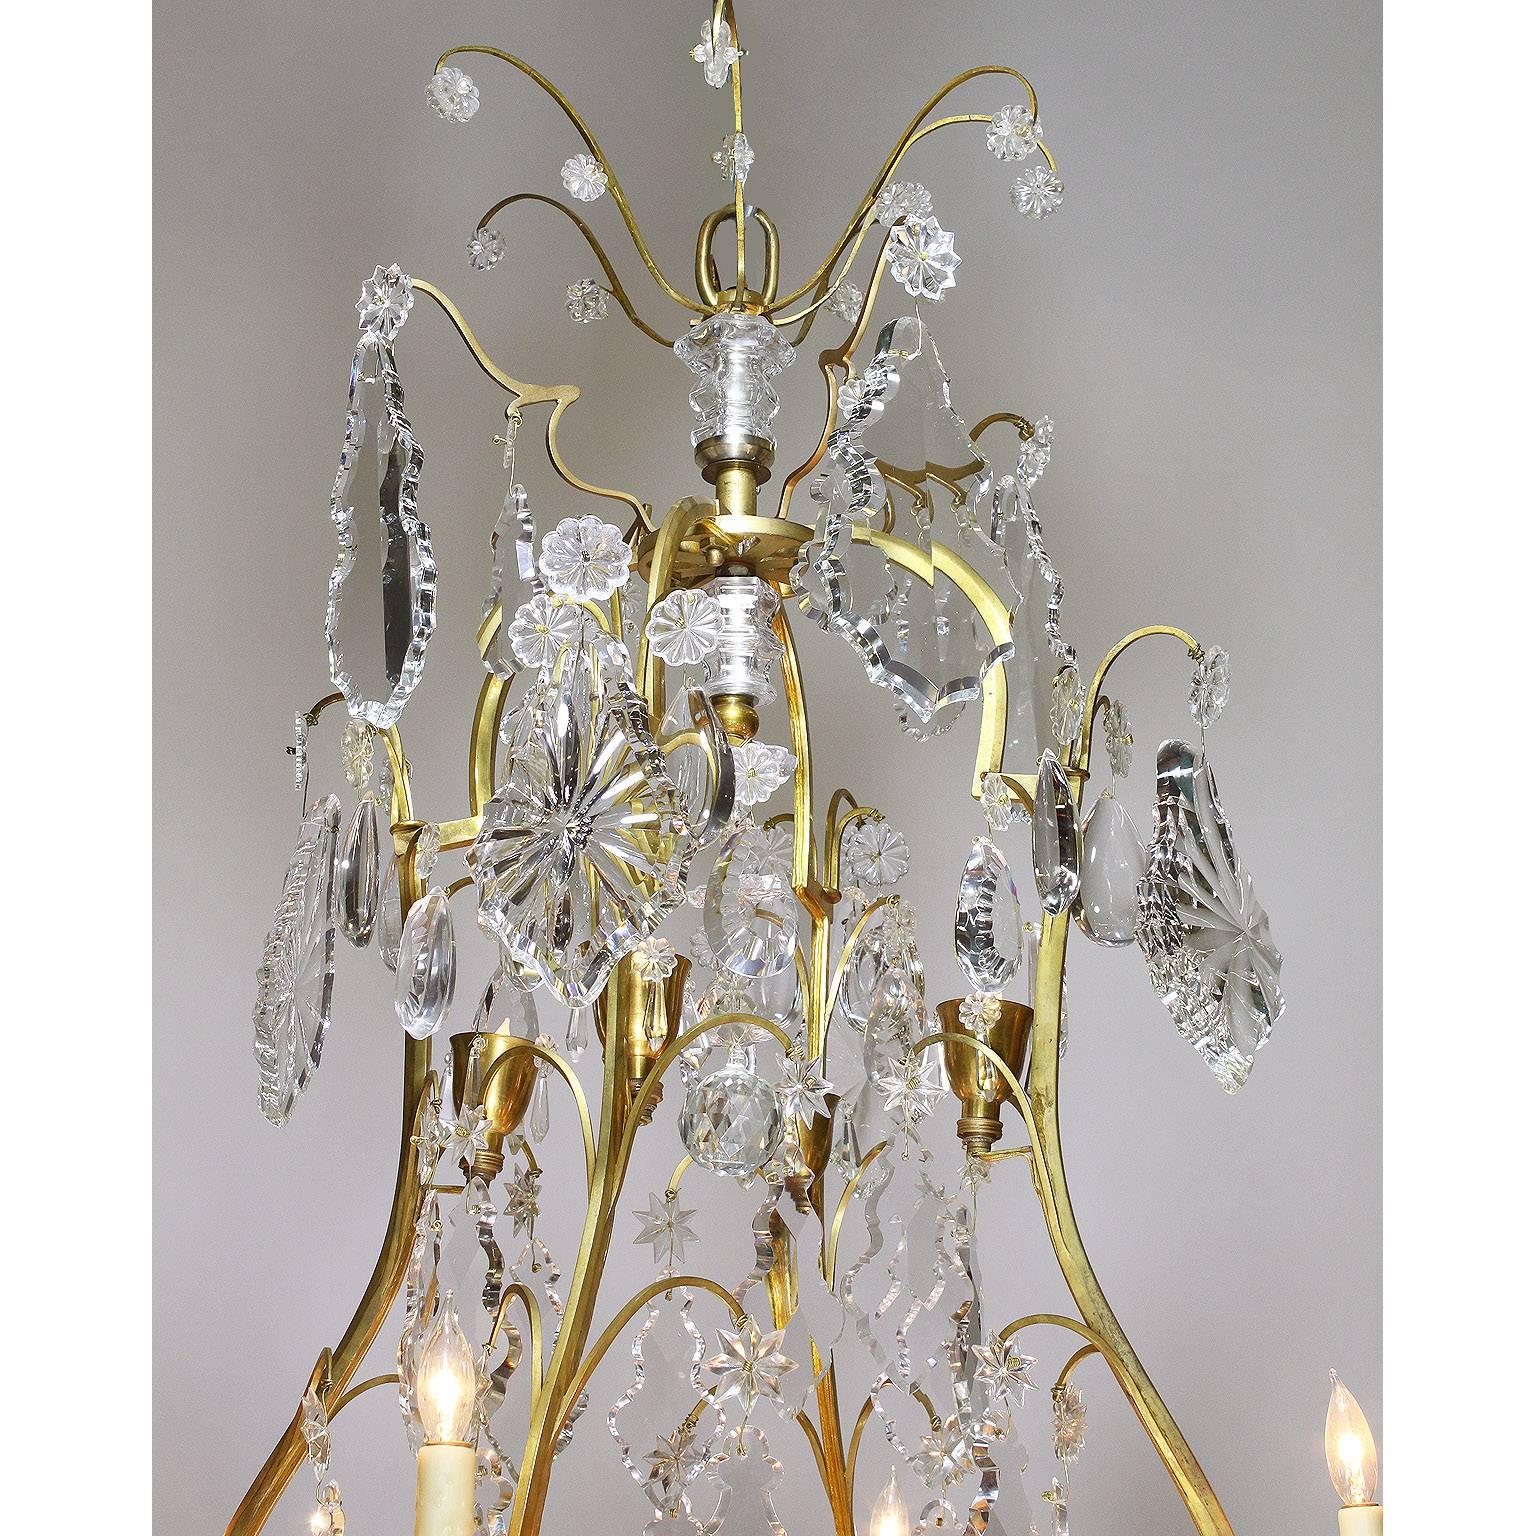 French 19th Century Louis XV Style Gilt-Bronze and Crystal Chandelier For Sale 5